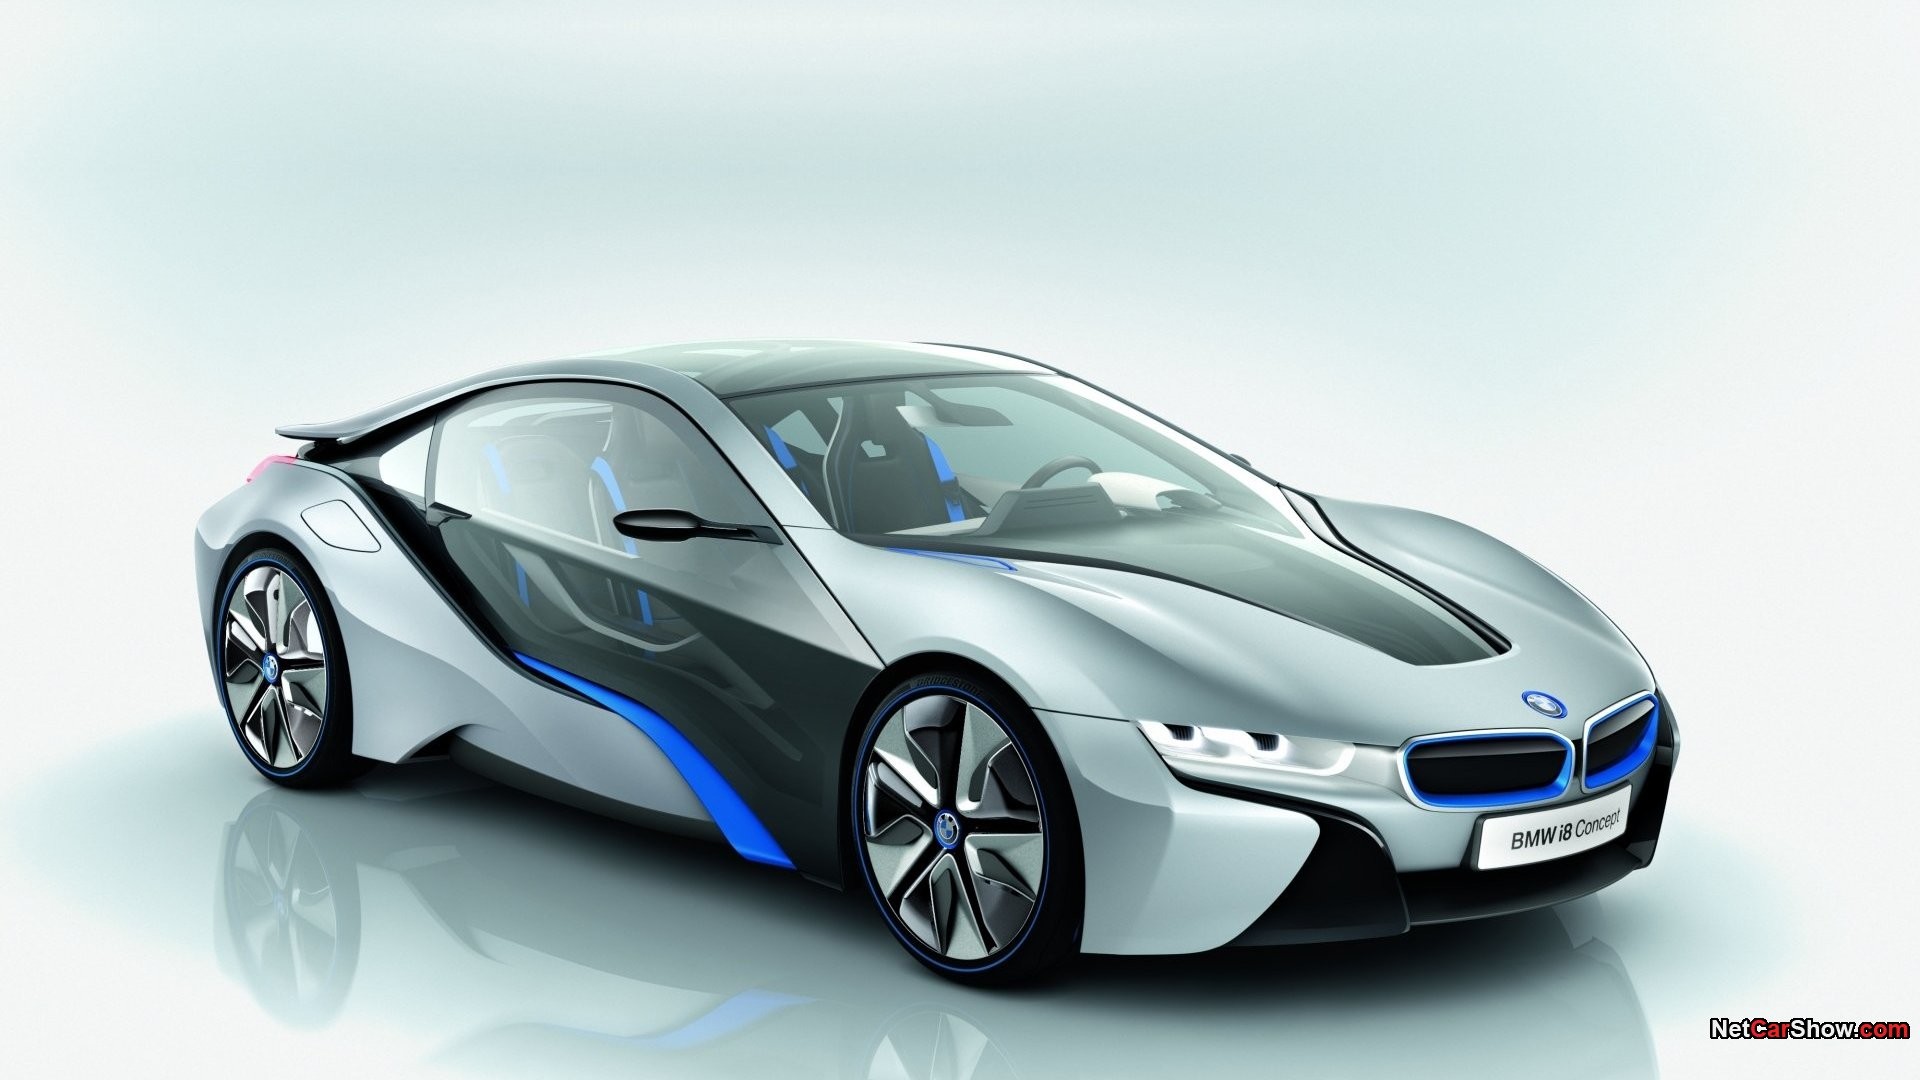 1920x1080 walpapers of cars | Car Wallpapers BMW I8 download cars wallpaper